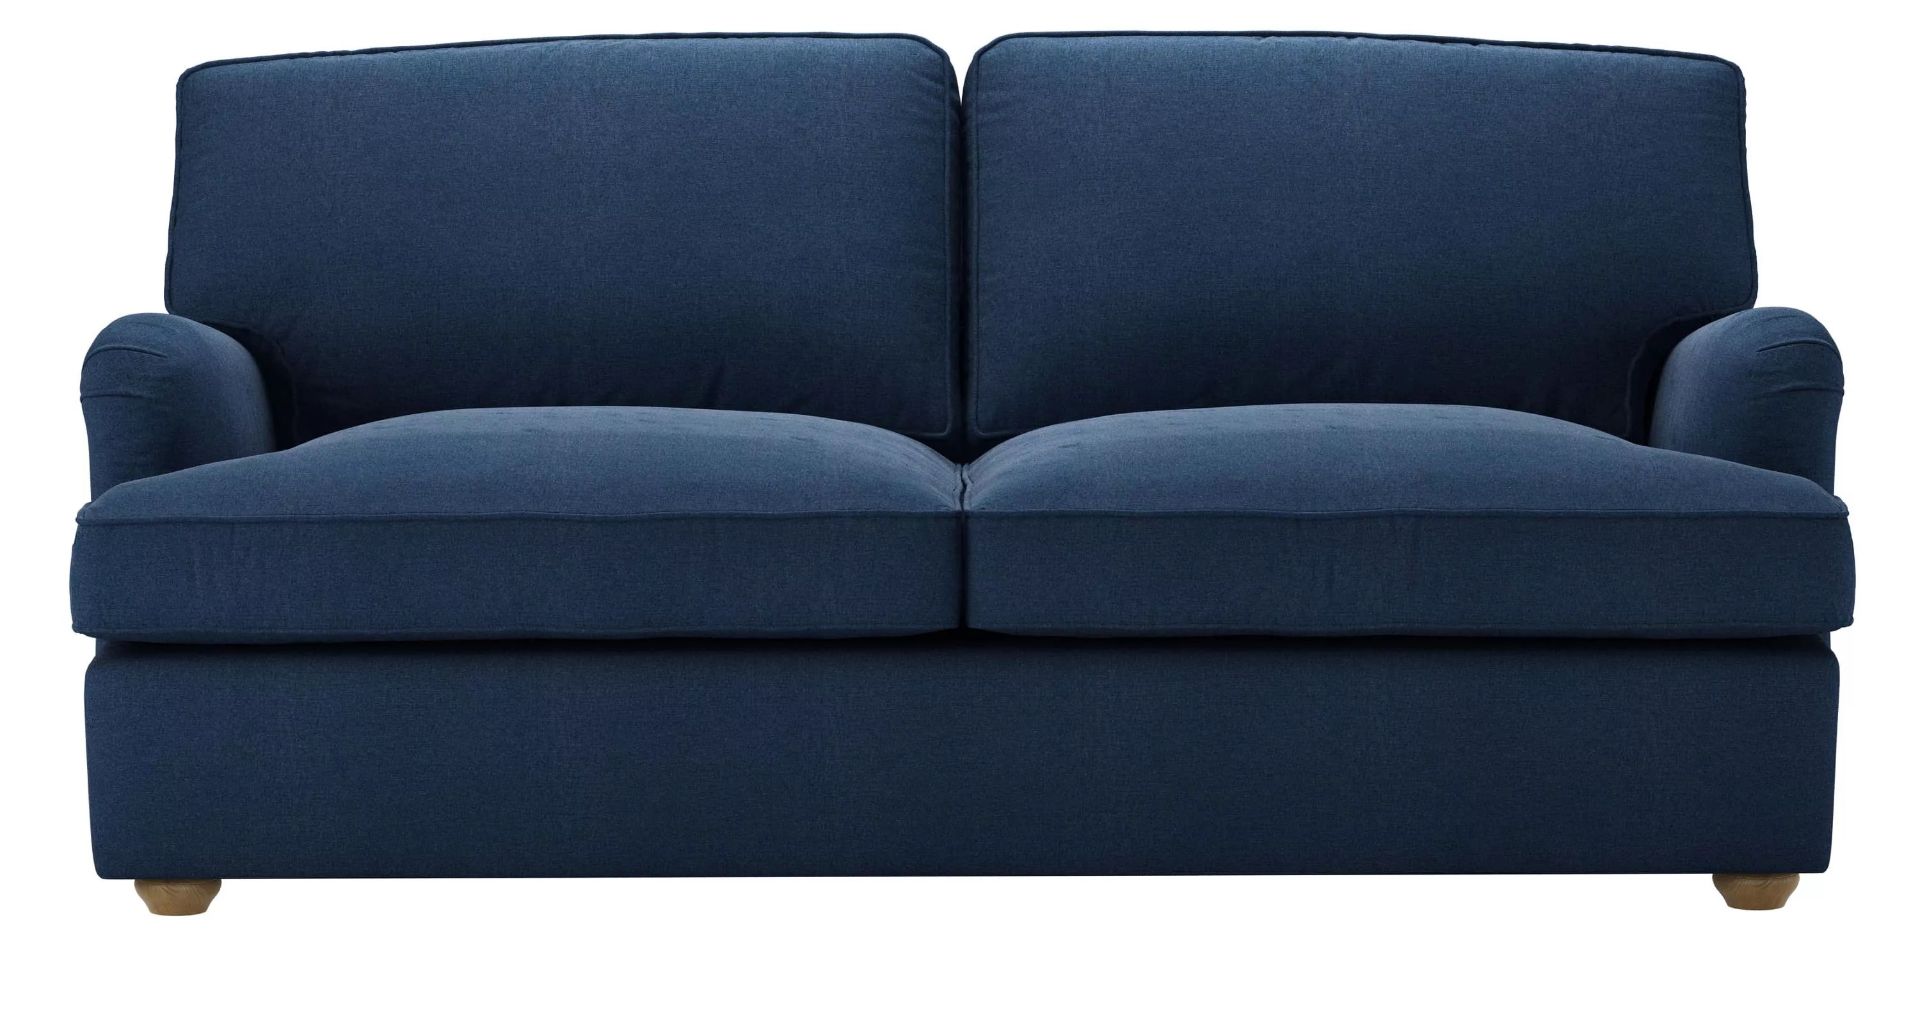 Bluebell Premium Comfort 3 Seat Sofa Bed In Washed Indigo Easy Cotton RRP - £3050